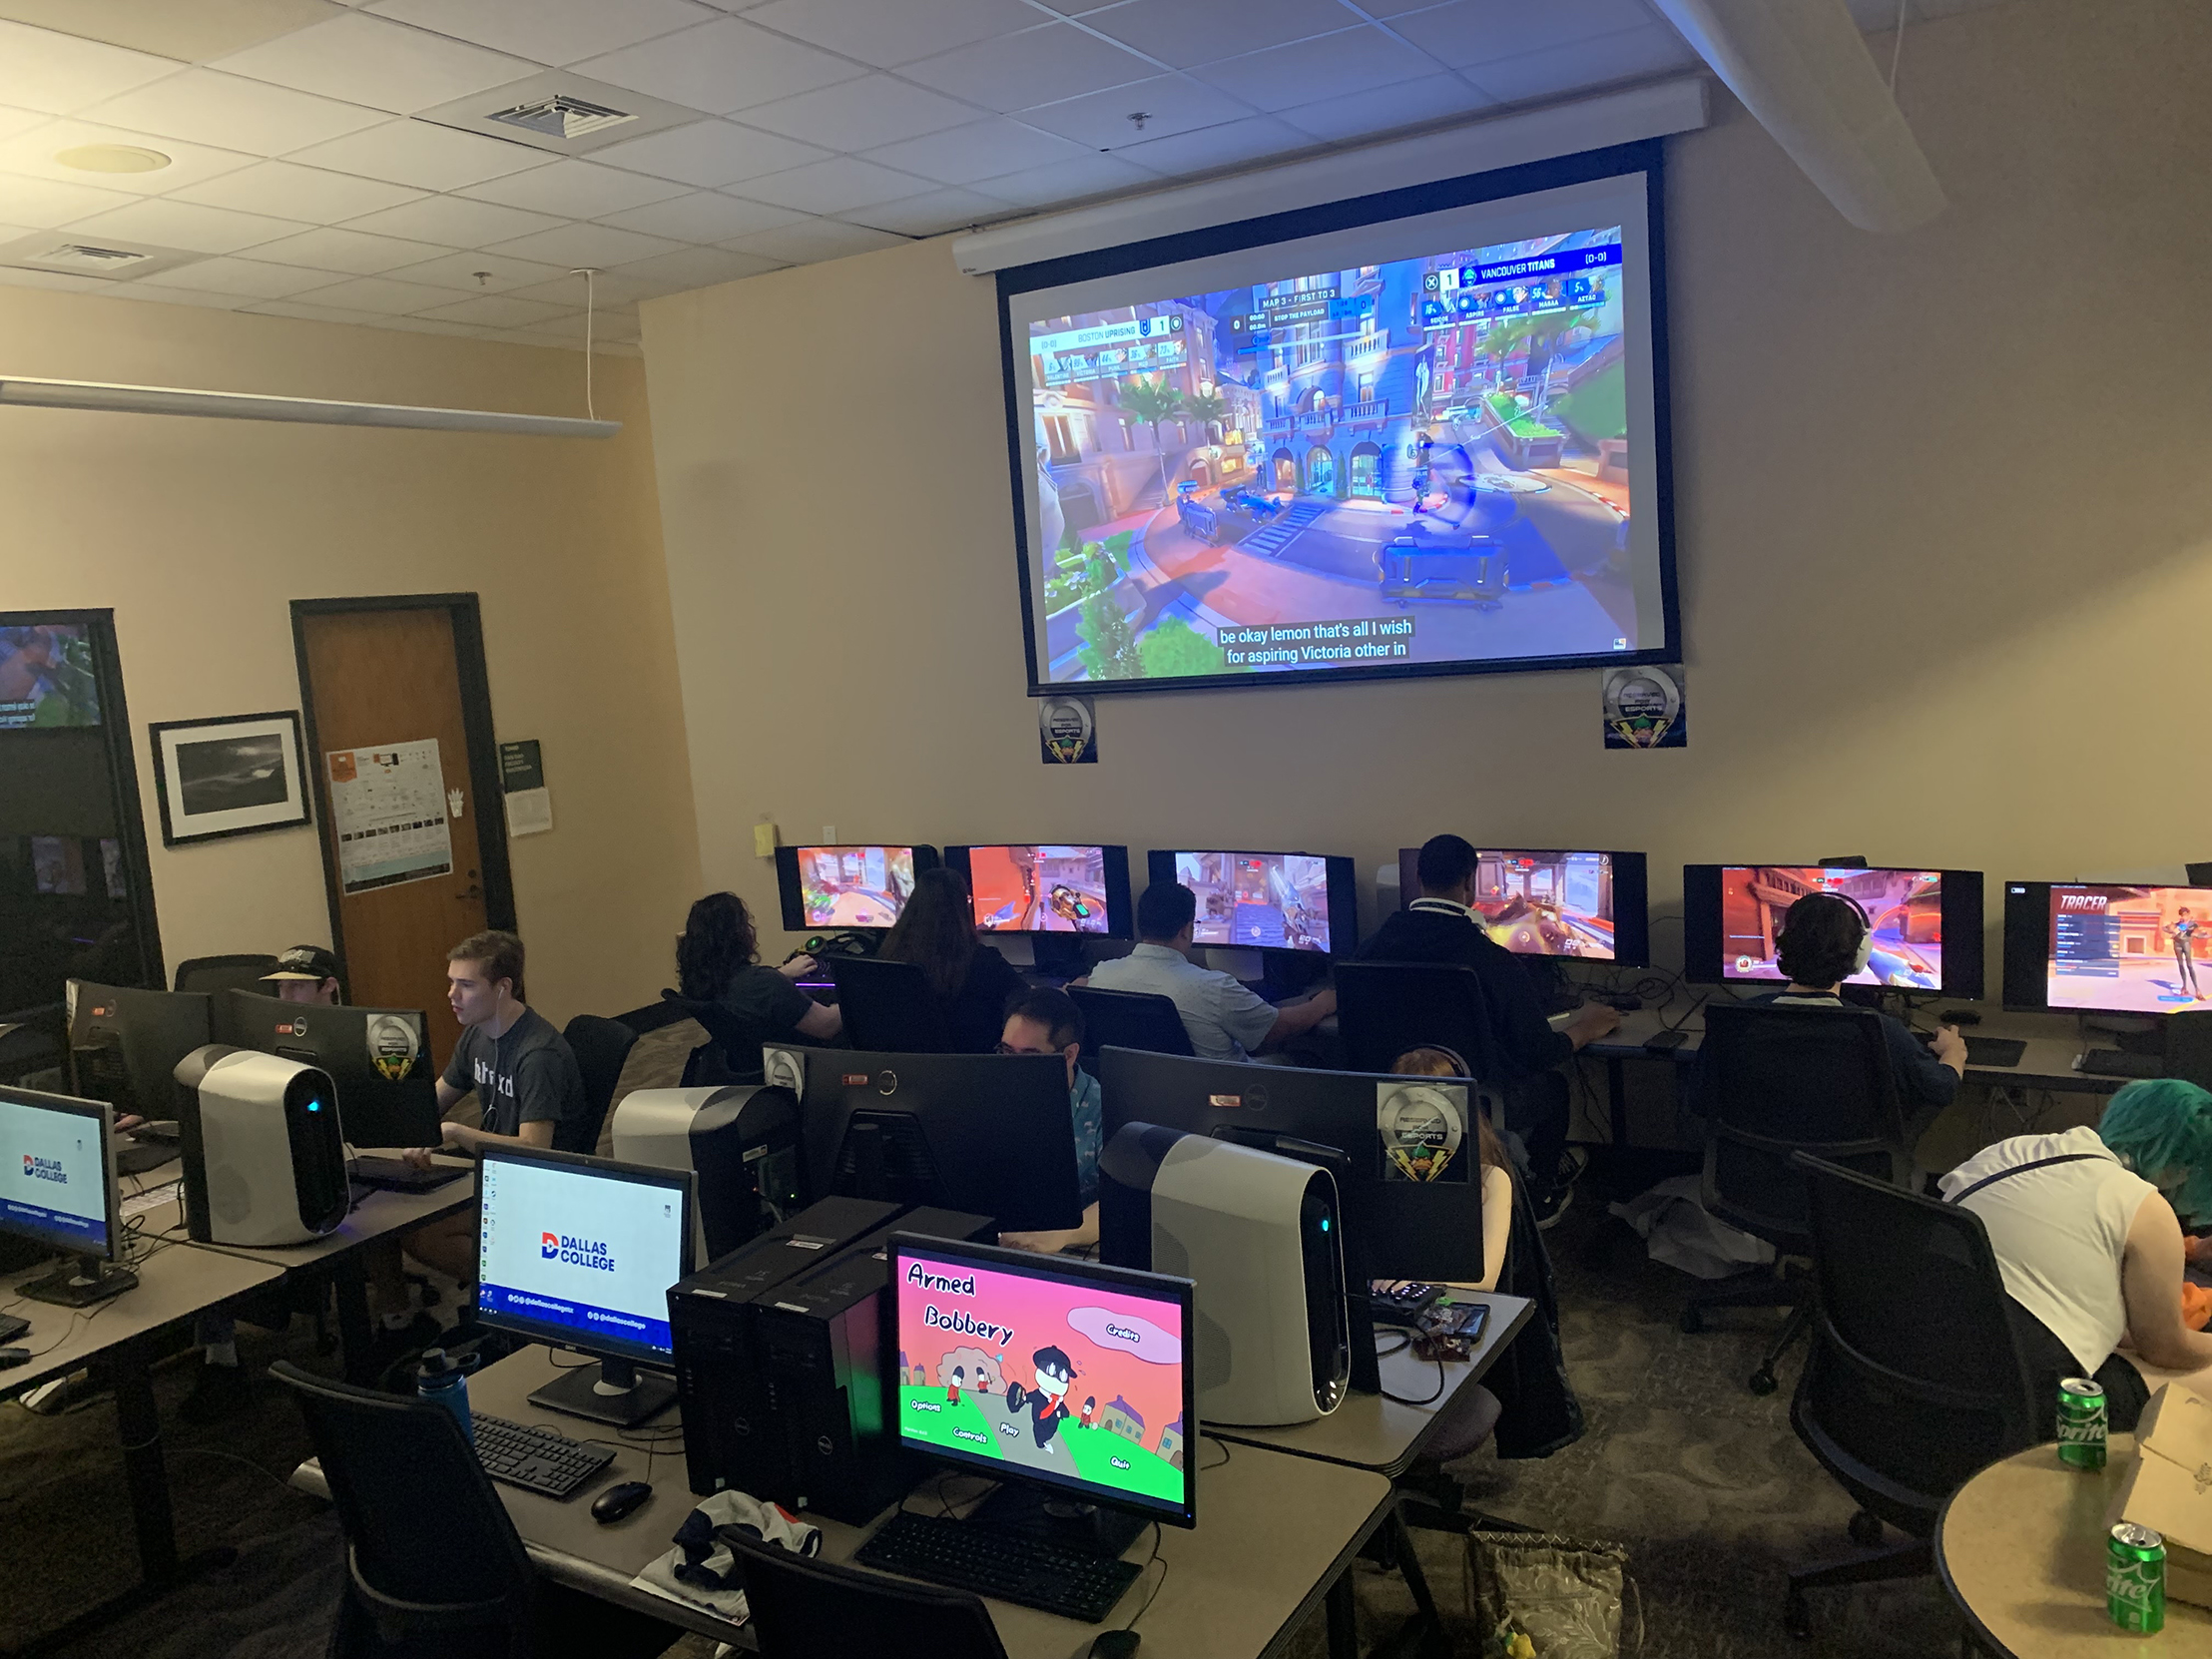 Dallas College esports returns to the school district-wide seven campuses next week. Students meeting academic requirements are eligible to compete on any of the seven campuses with the Dallas College network. 